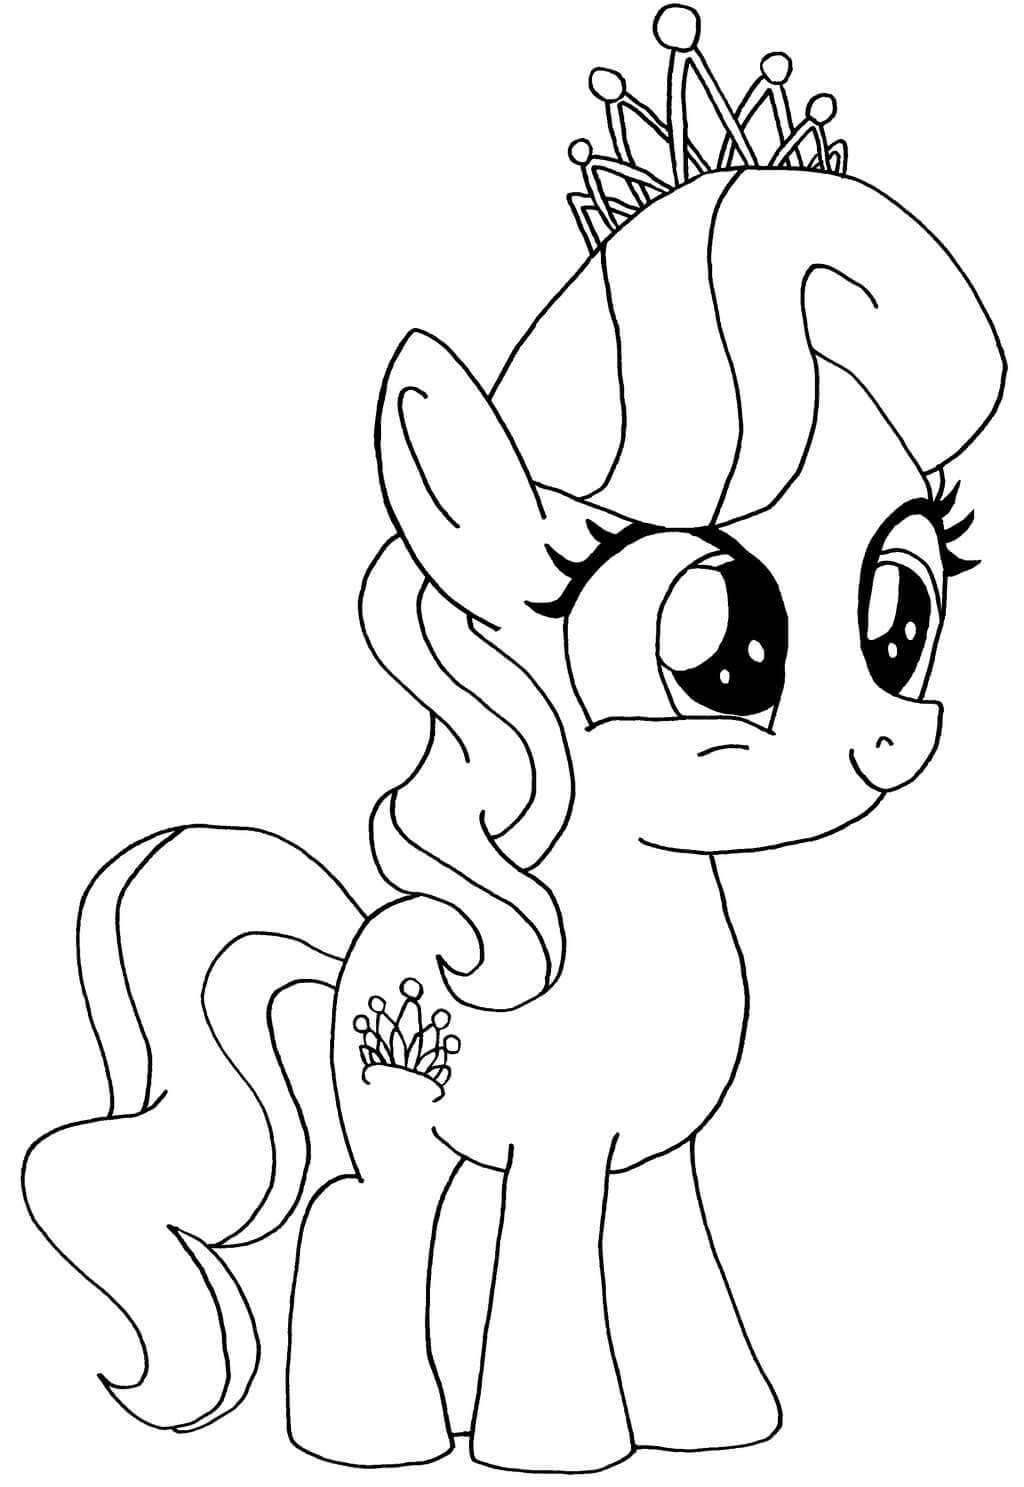 Coloring Pages My Little Pony
 20 My Little Pony Coloring Pages Your Kid Will Love